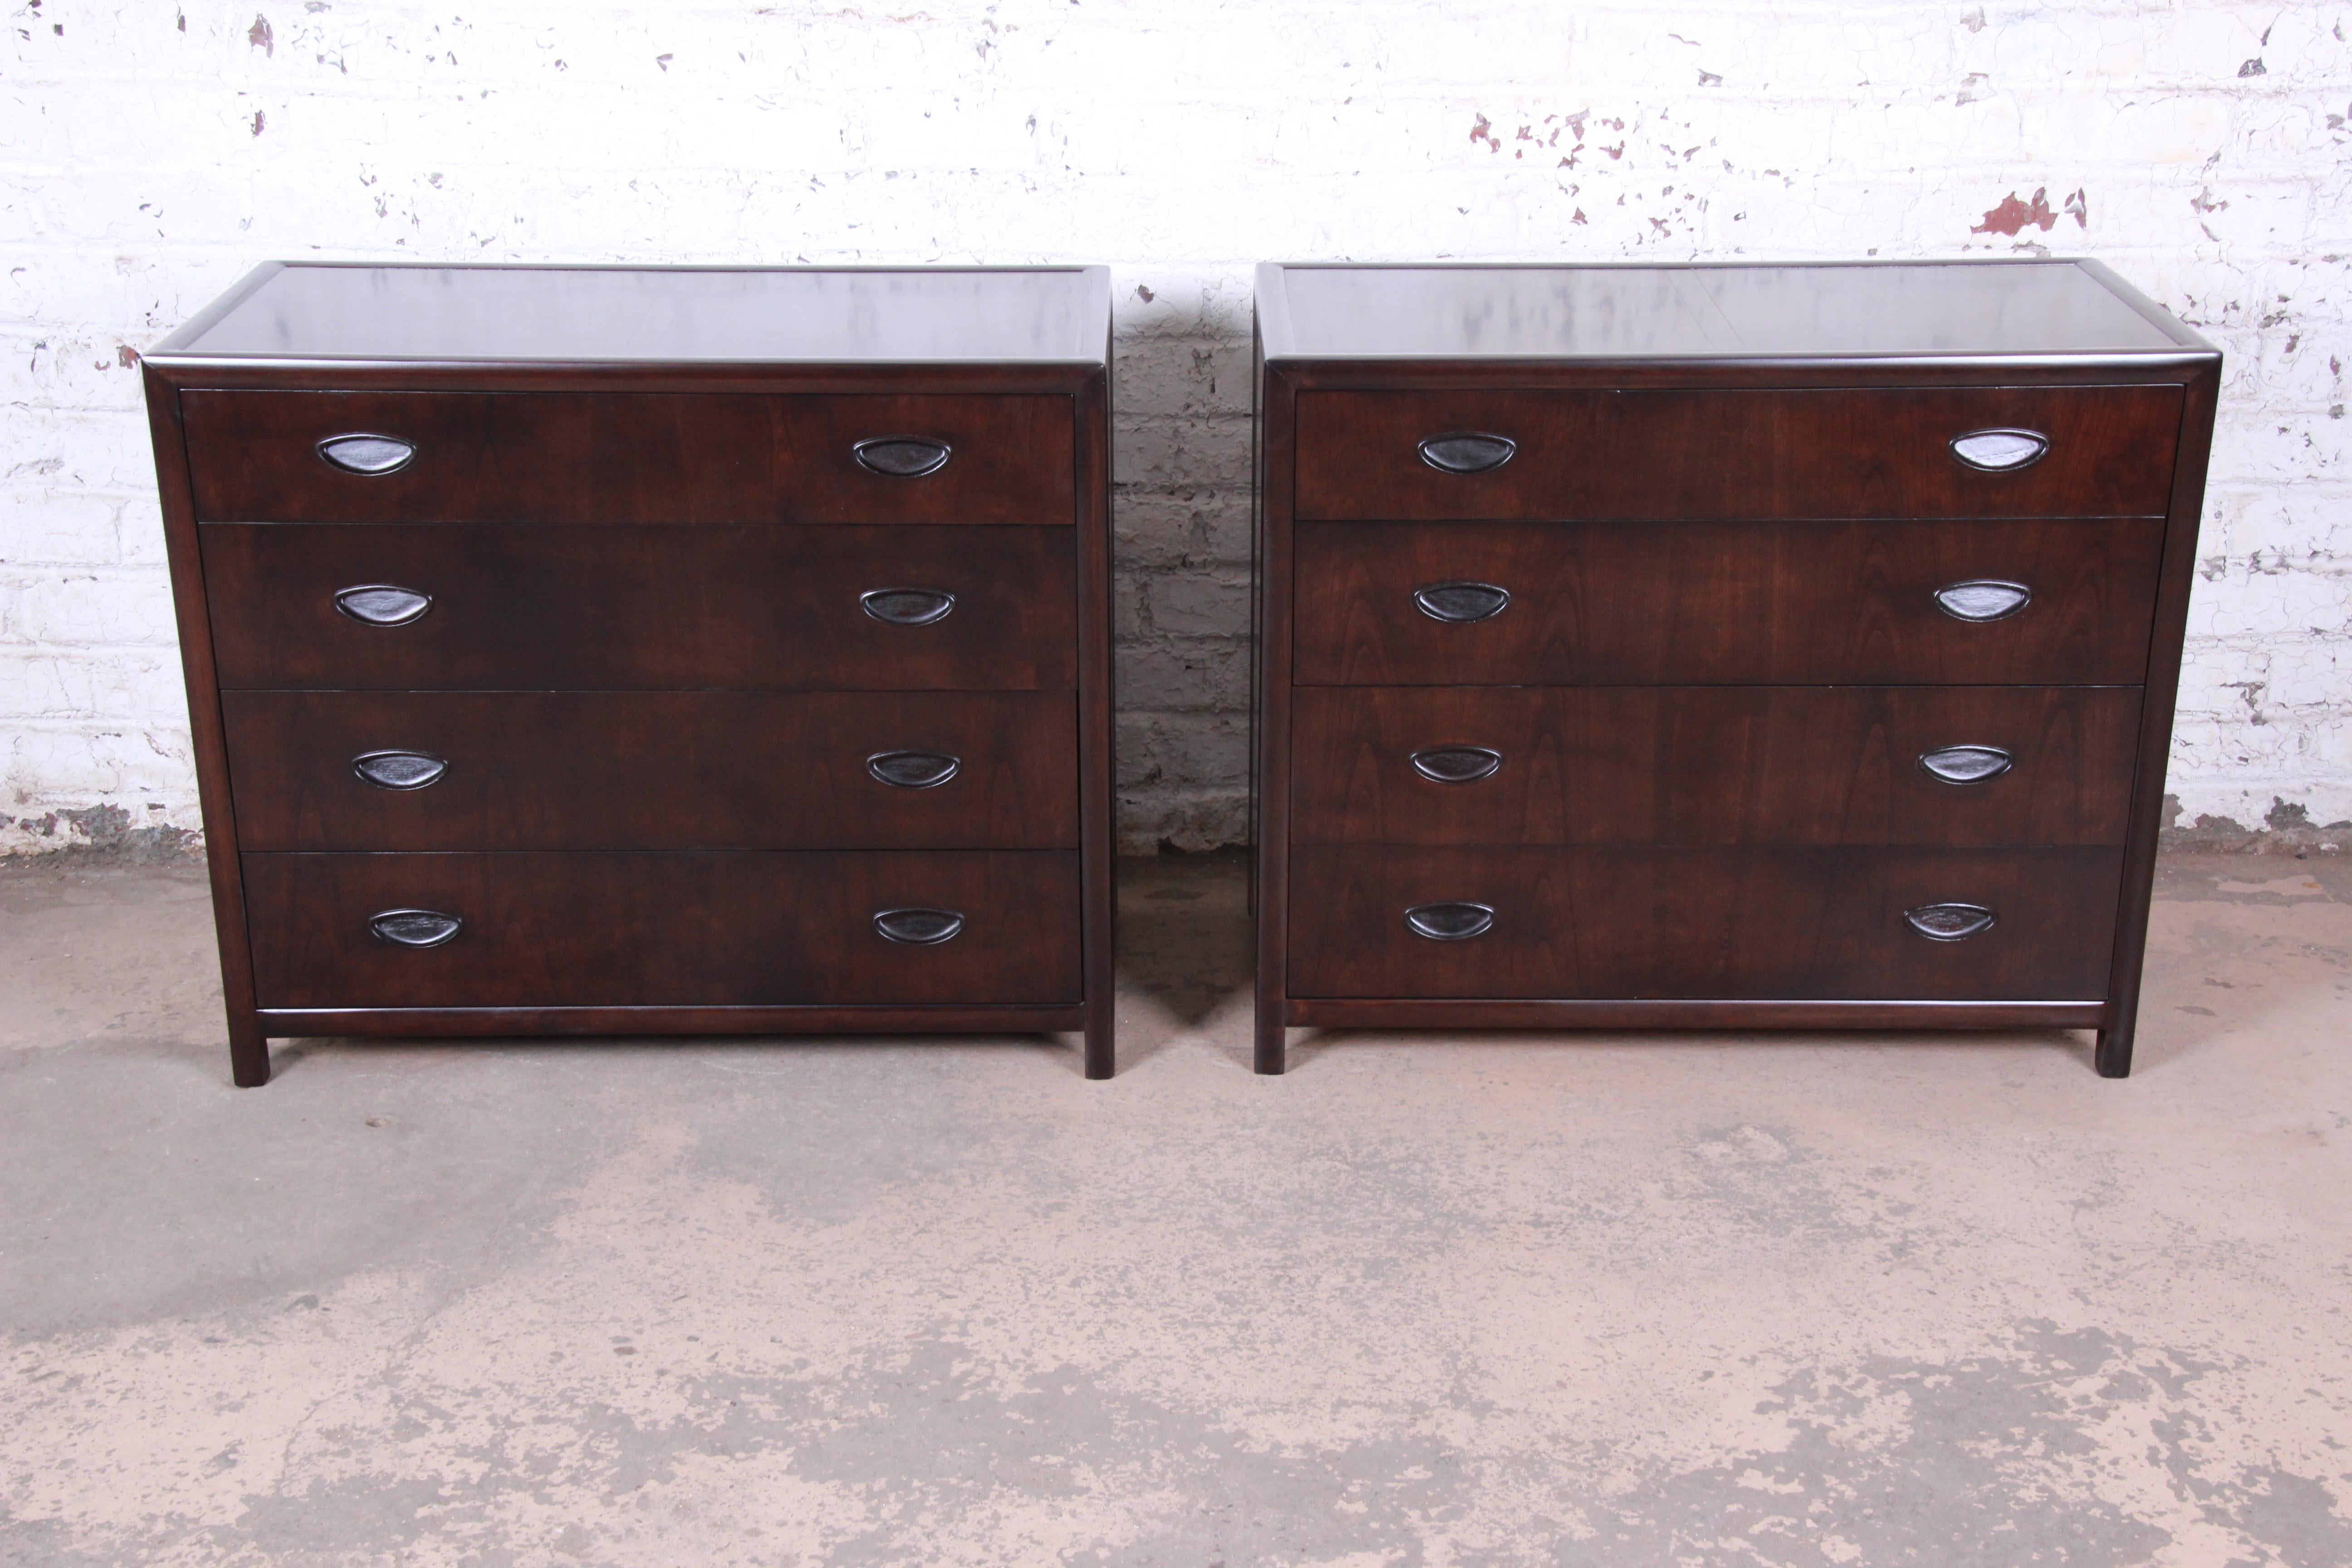 An exceptional pair of bachelor chests or large nightstands designed by Michael Taylor for his 